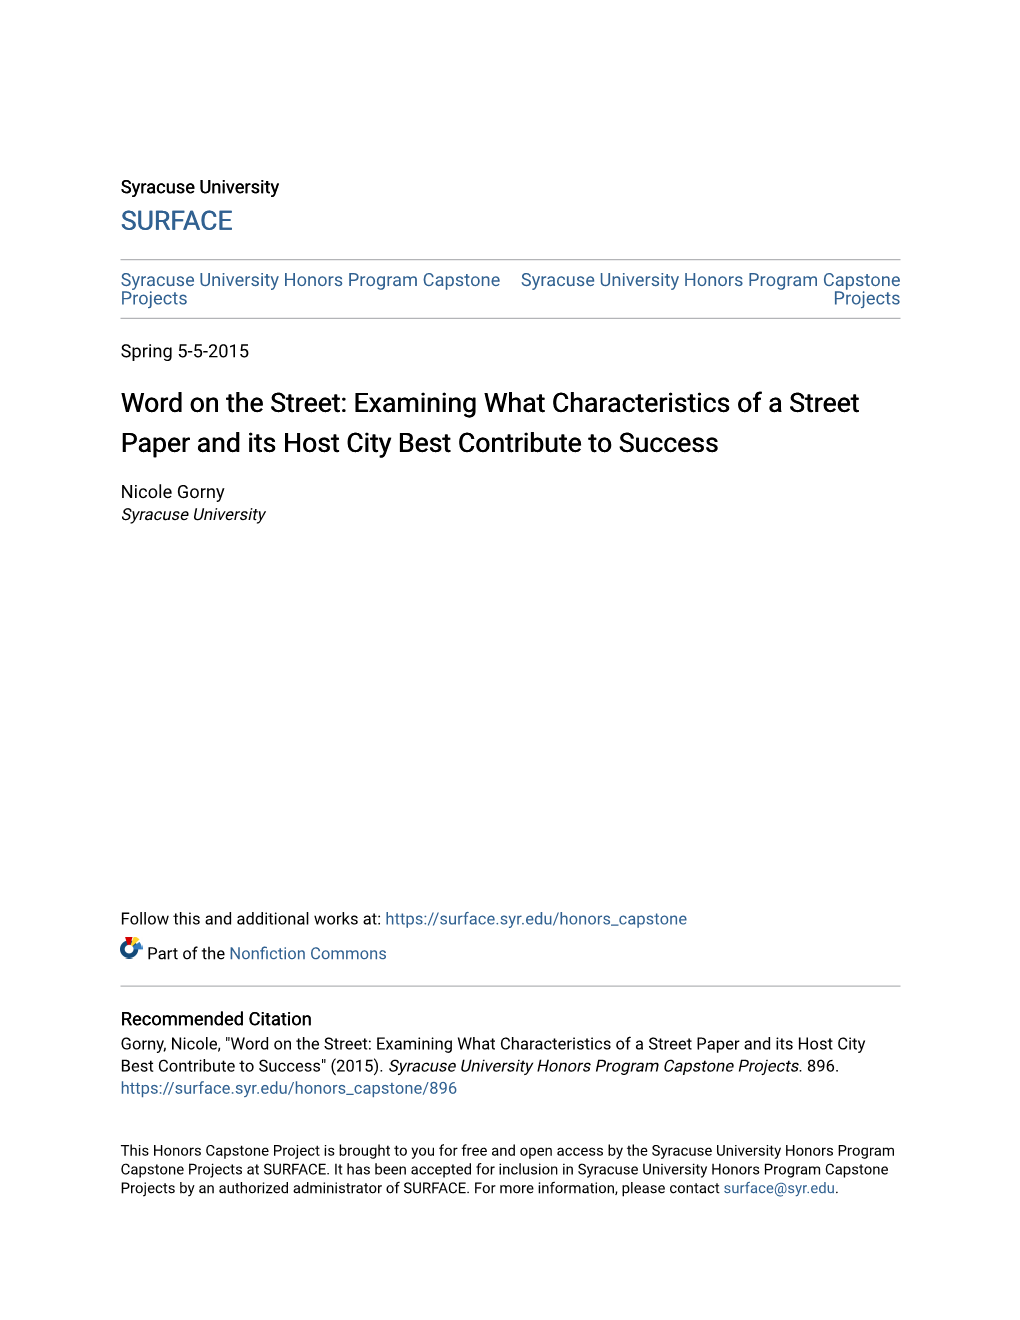 Examining What Characteristics of a Street Paper and Its Host City Best Contribute to Success